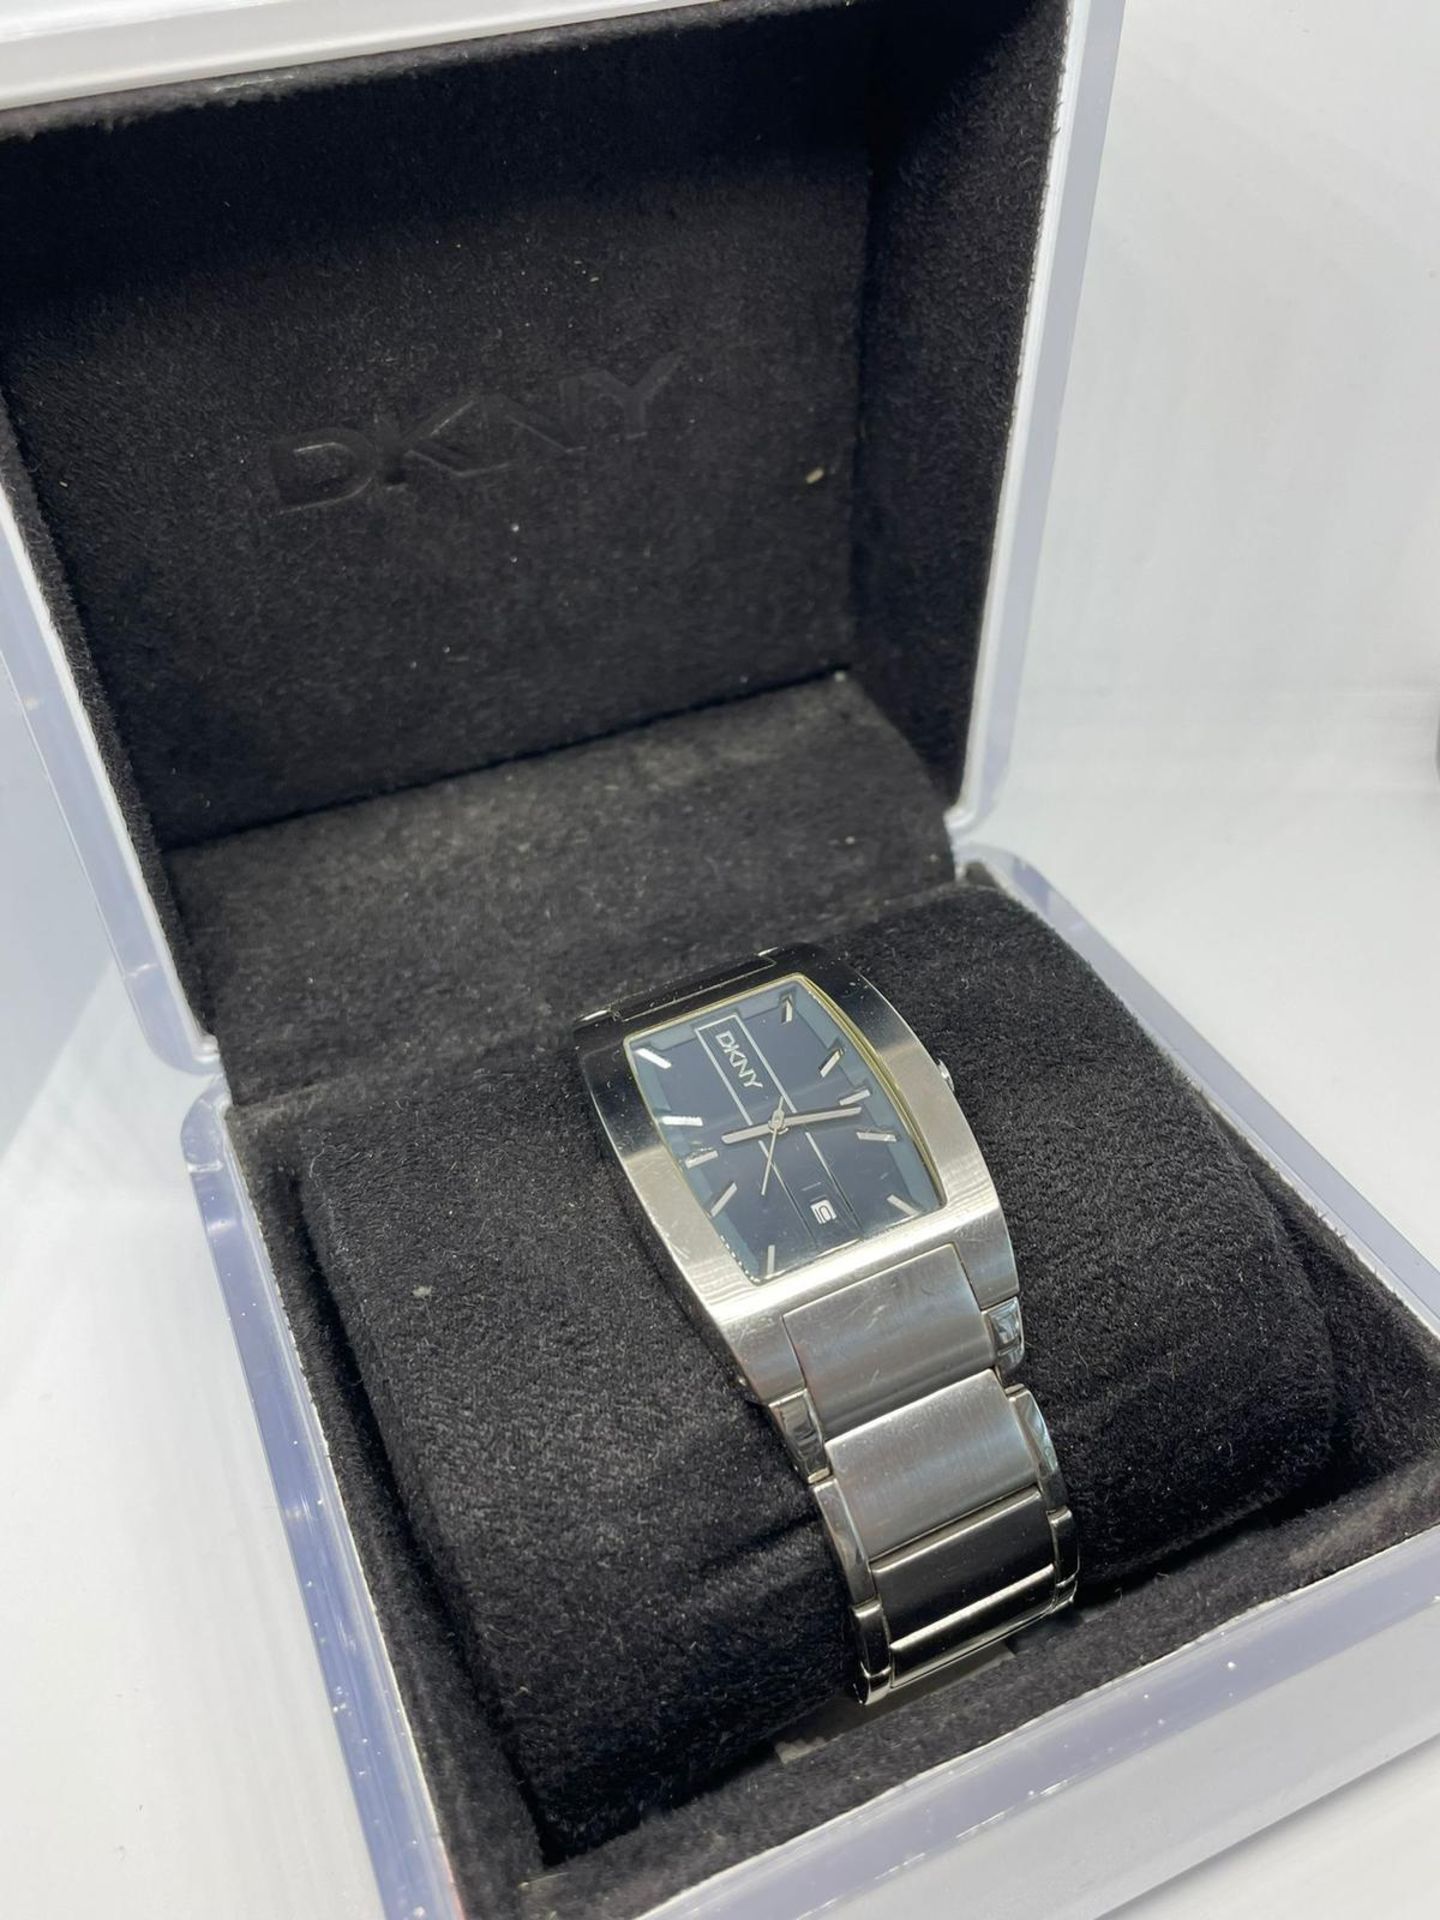 Boxed DKNY watch running